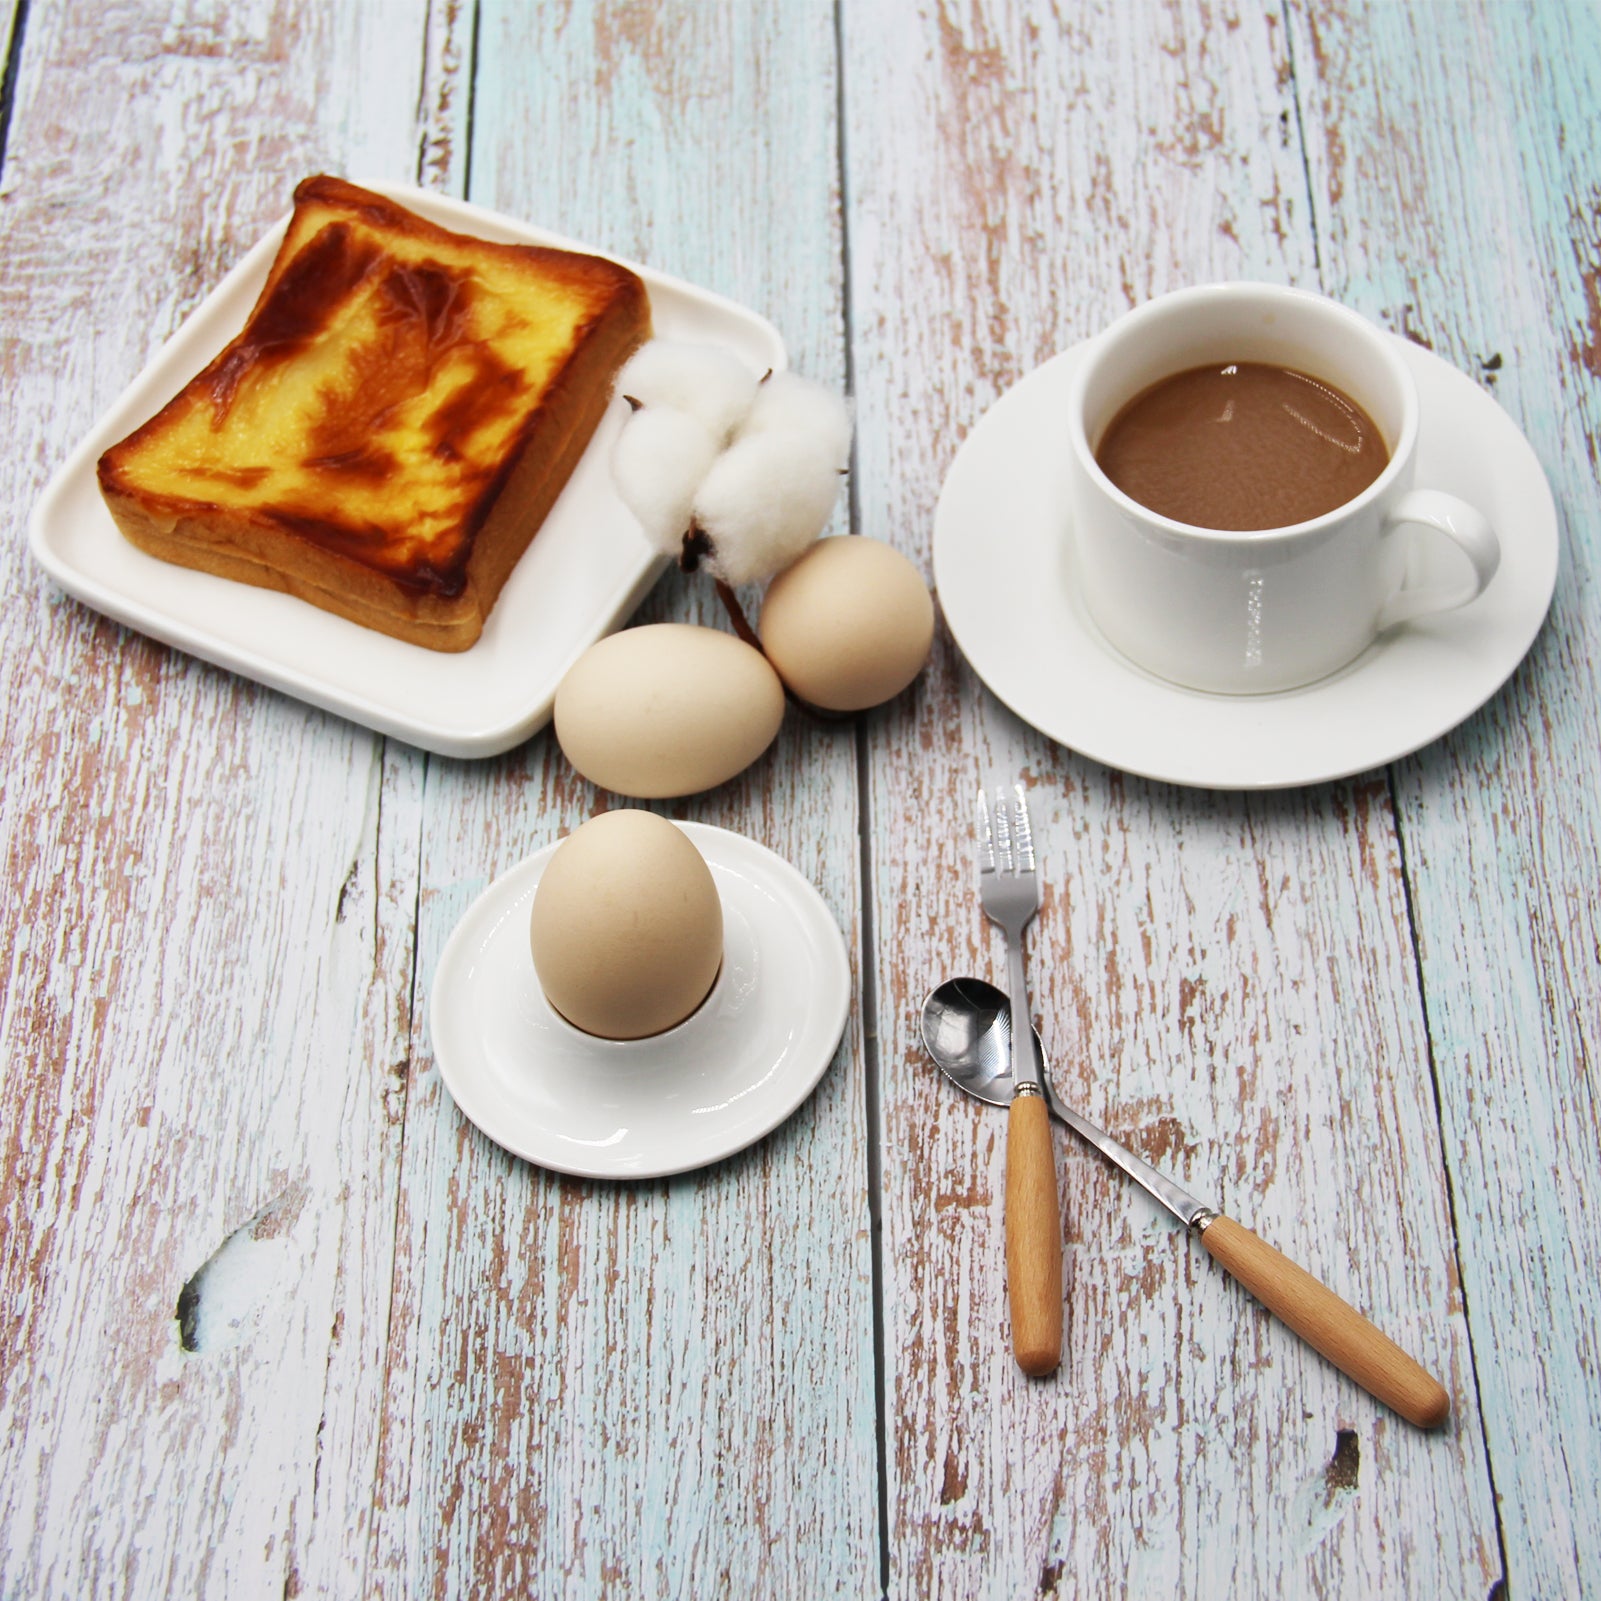 CE Compass Egg Cup Holder Set (2 Piece Sets) - Stainless Steel Egg